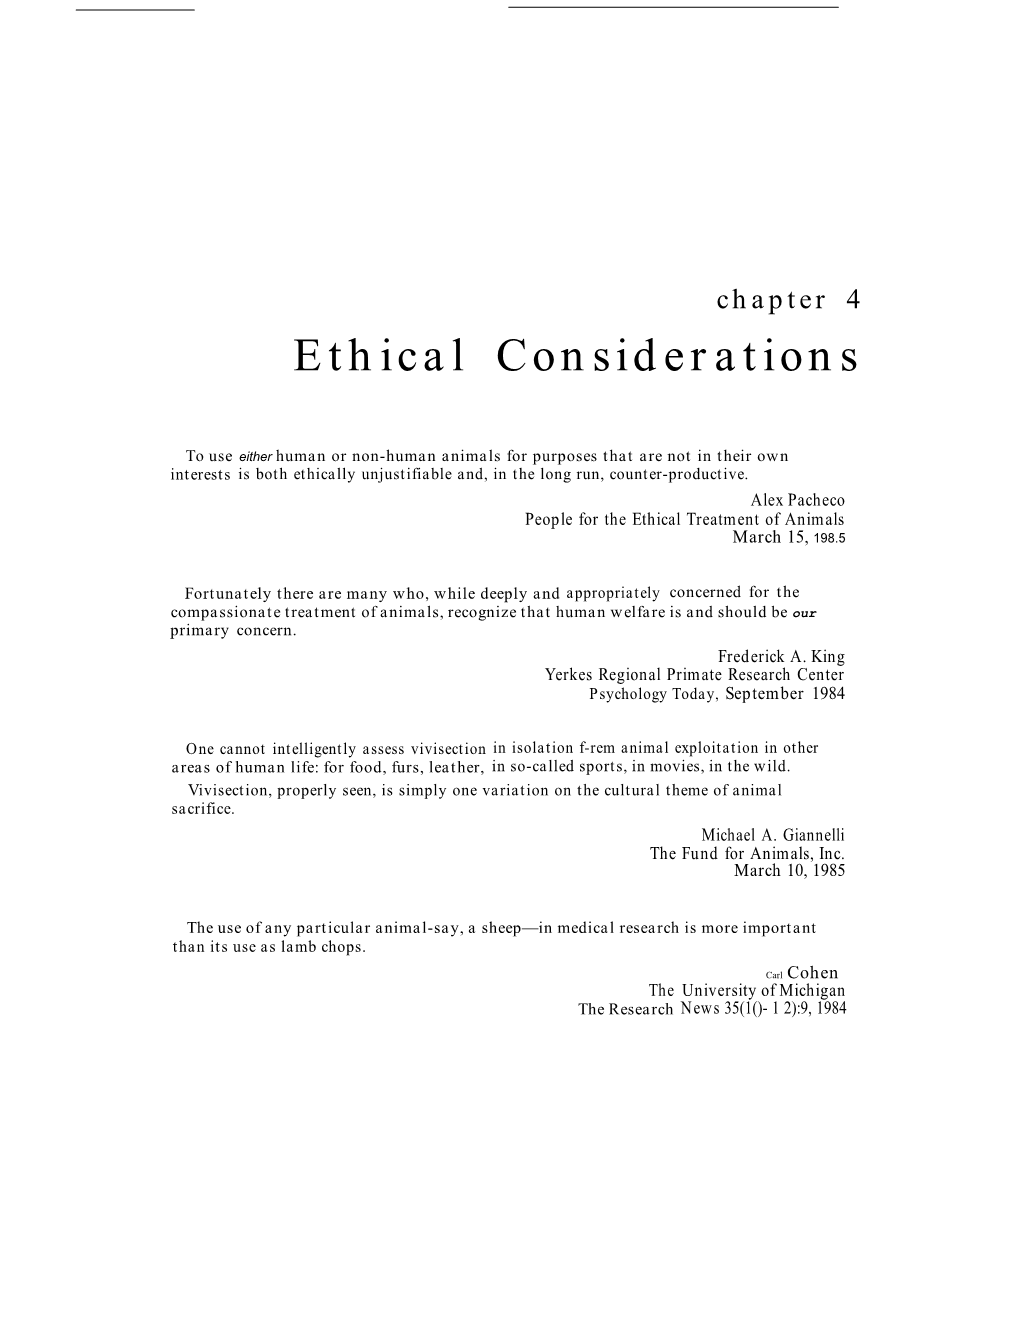 Ethical Considerations